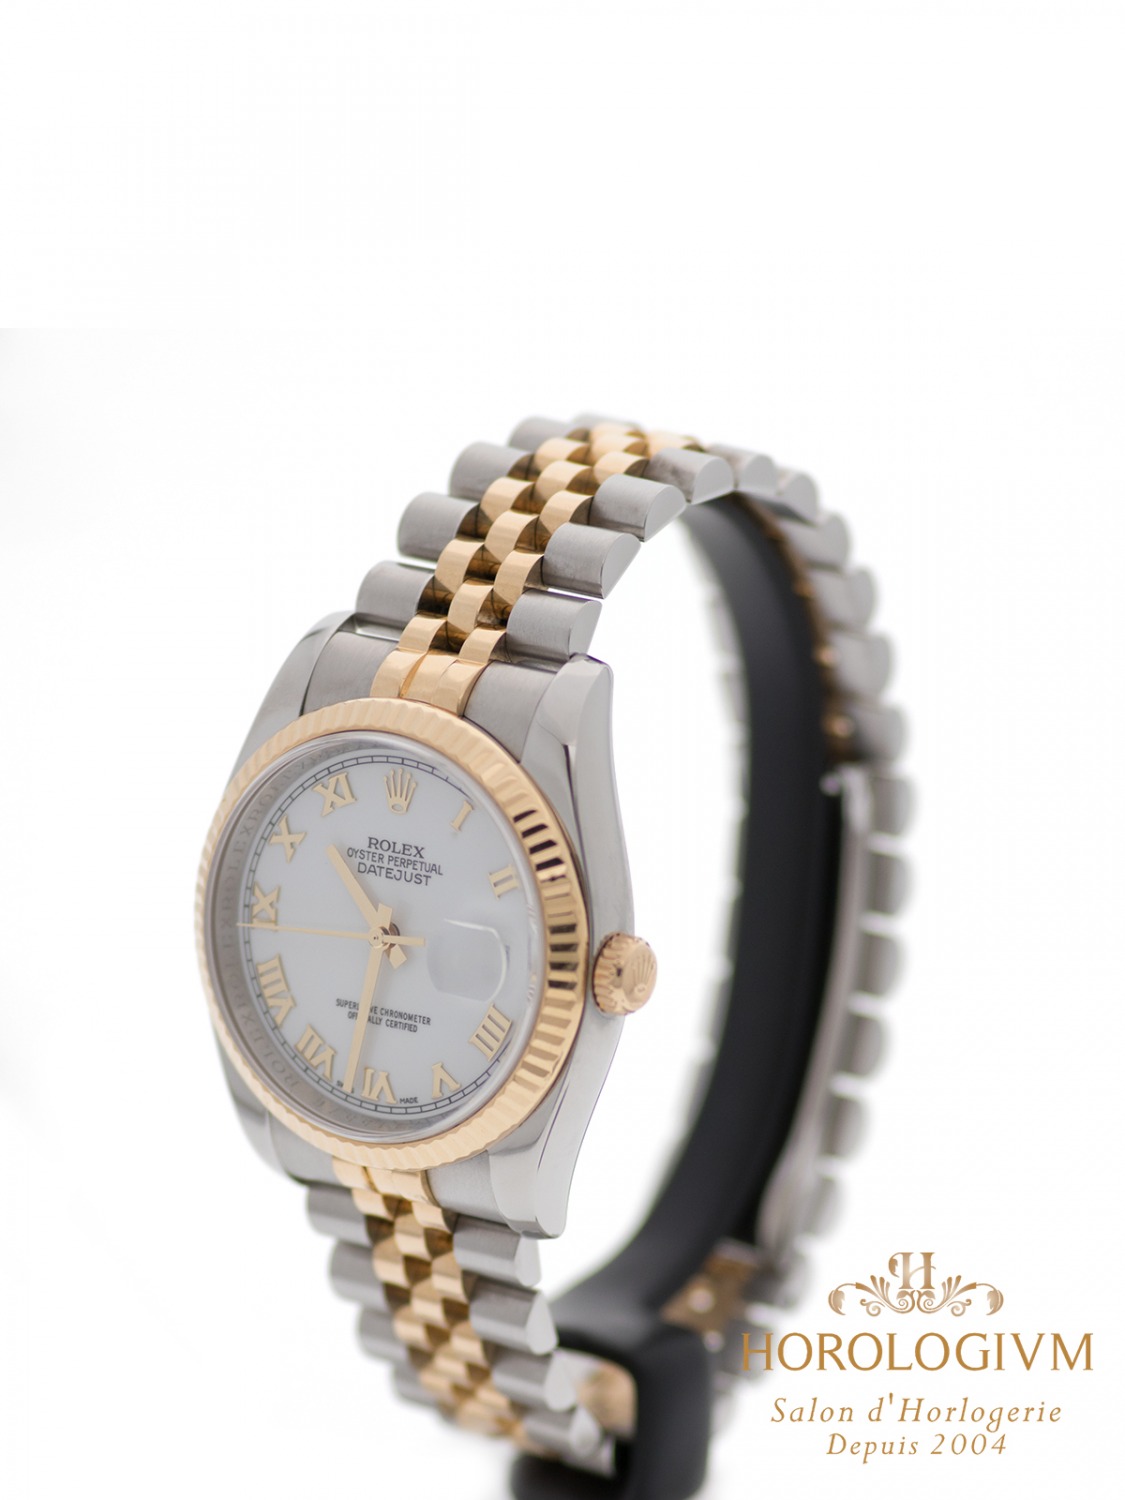 Rolex Datejust TWO-TONE 36MM REF. 116233 watc,  two - tone (bi - colored) silver (case) and yellow gold (bezel)